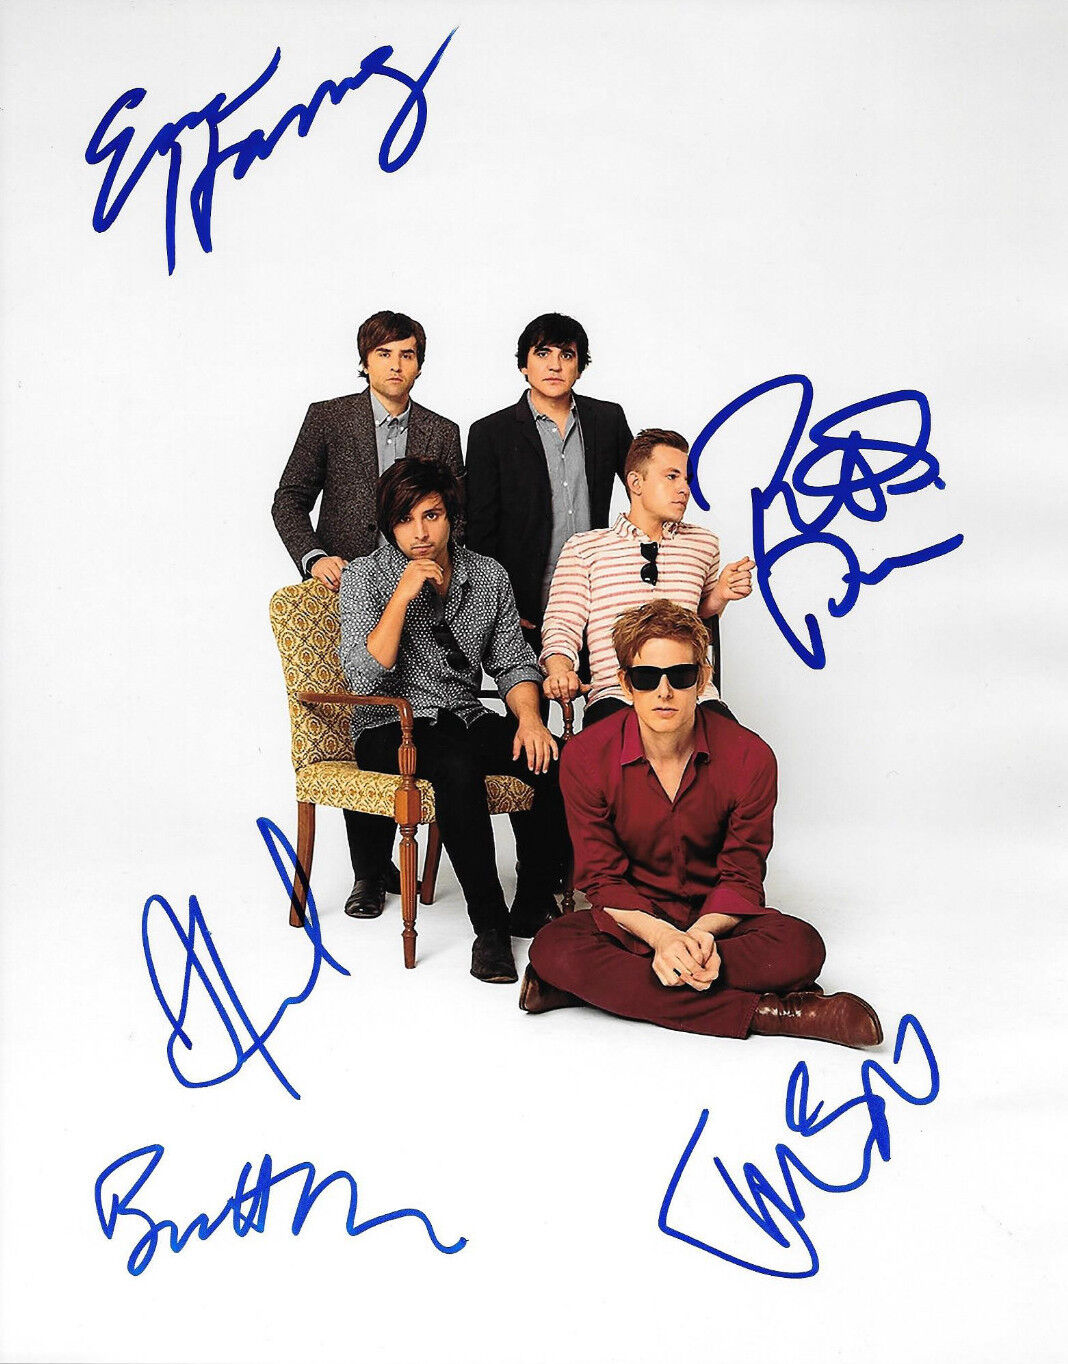 GFA American Rock Band * SPOON * Signed 8x10 Photo Poster painting AD1 COA